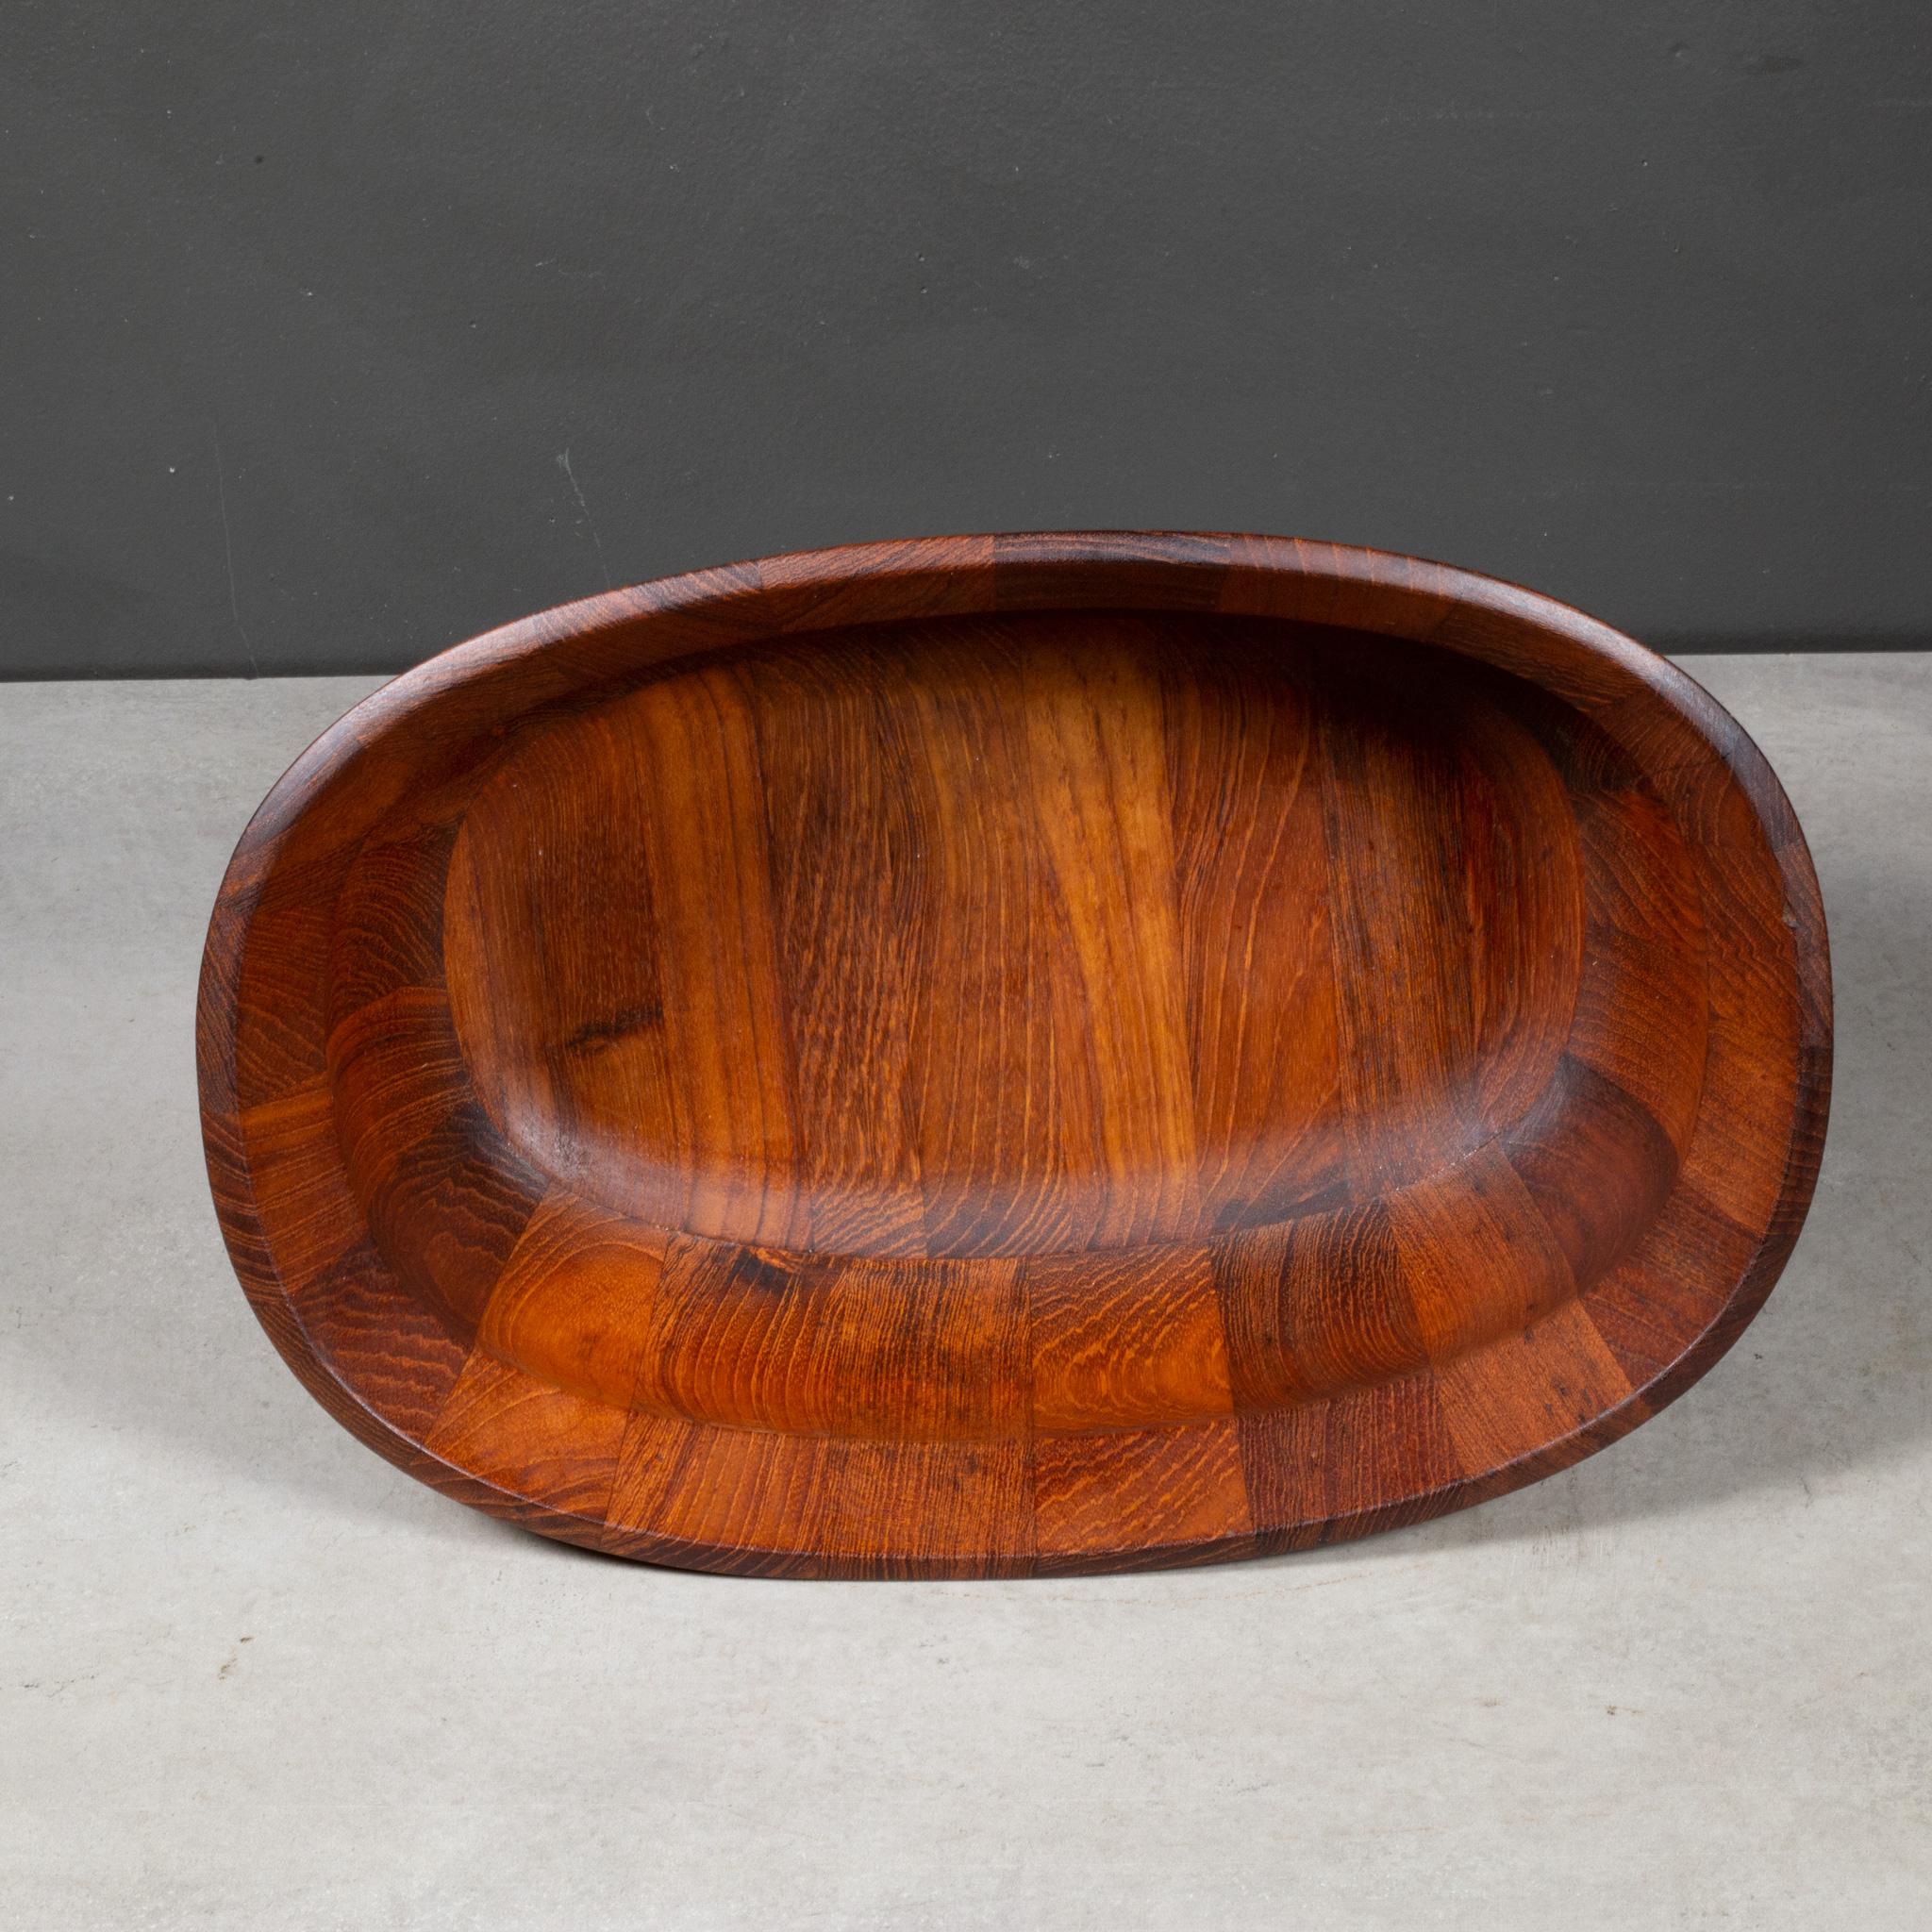  Mid-century Danish Jens Quistgaard Teak Dansk Oval Bowl c.1960 (FREE SHIPPING) In Good Condition For Sale In San Francisco, CA